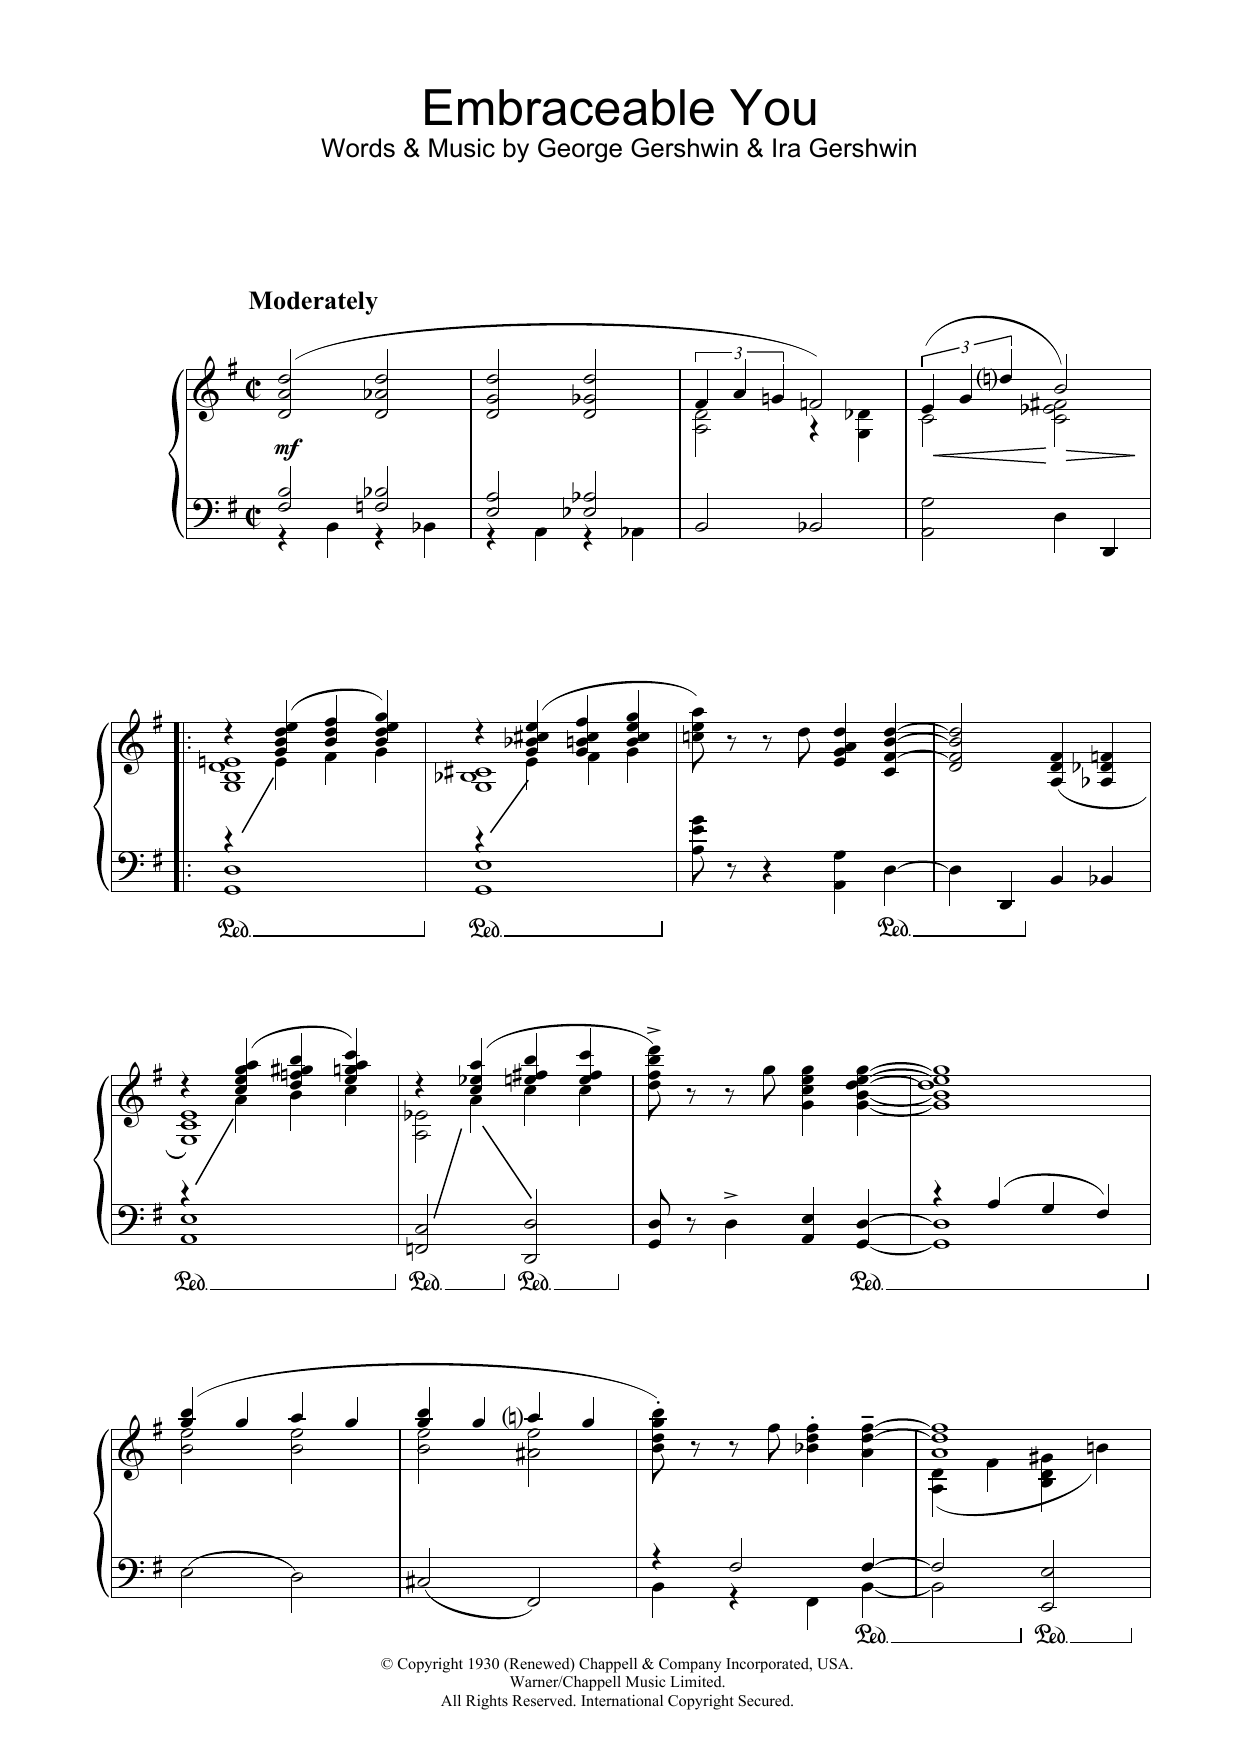 George Gershwin Embraceable You sheet music notes and chords. Download Printable PDF.